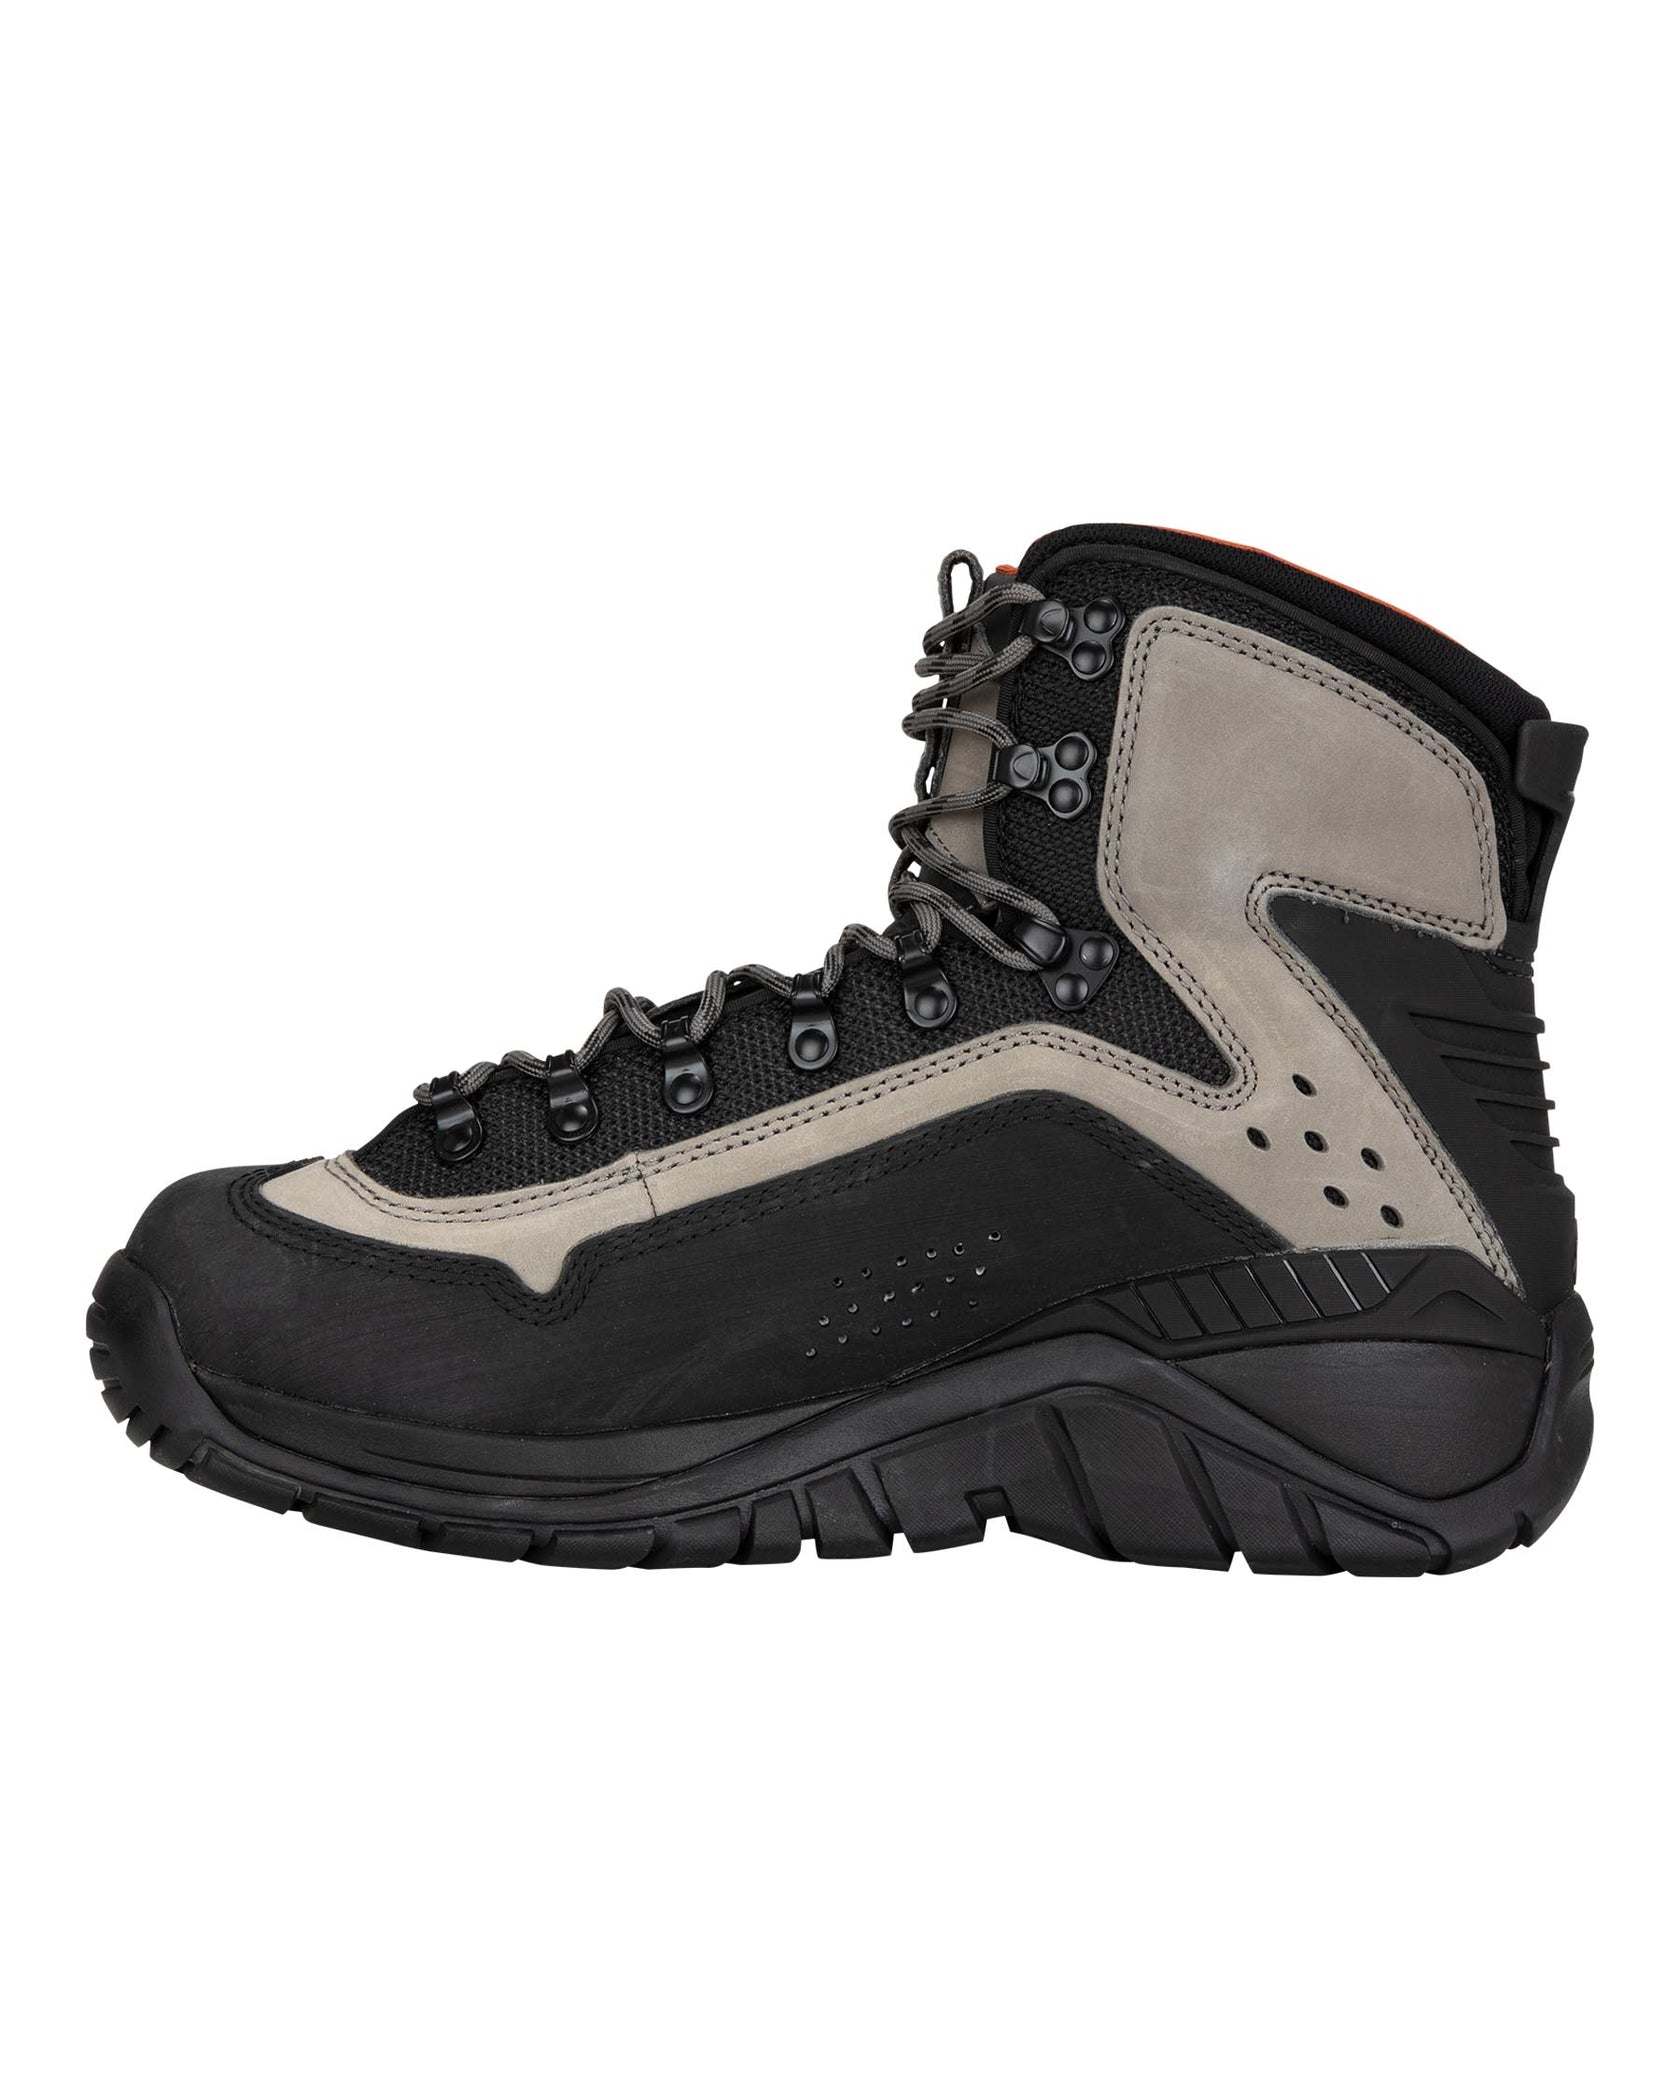 SIMMS G3 GUIDE VIBRAM SOLE WADING BOOT